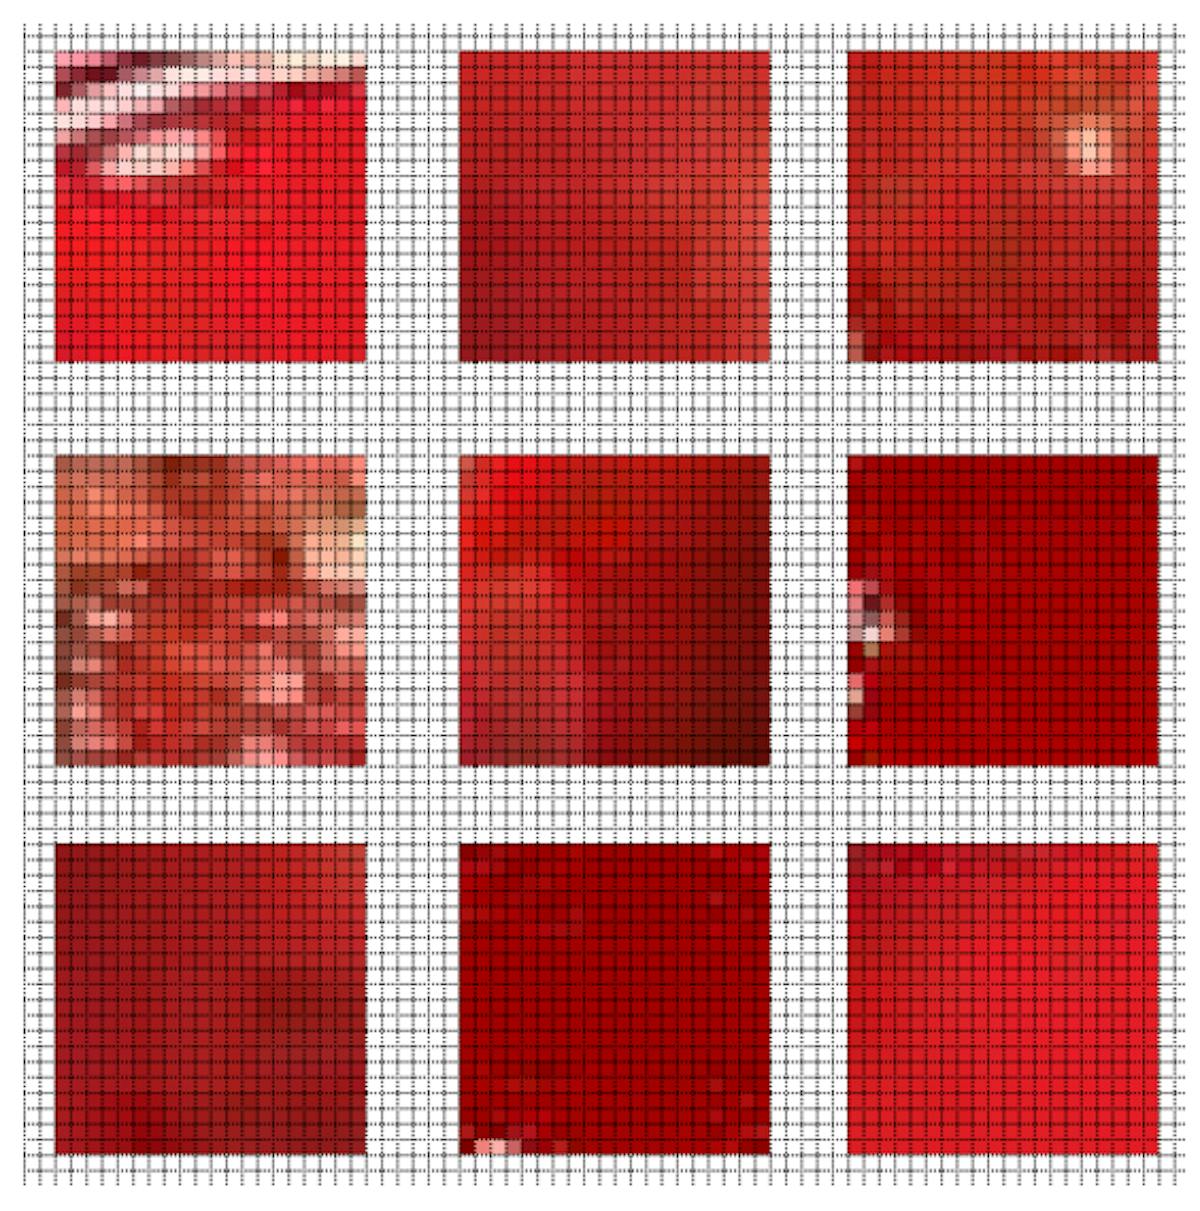 Figure 3.2: Figure showing sample cropped regions of size 20 × 20 containing blood.